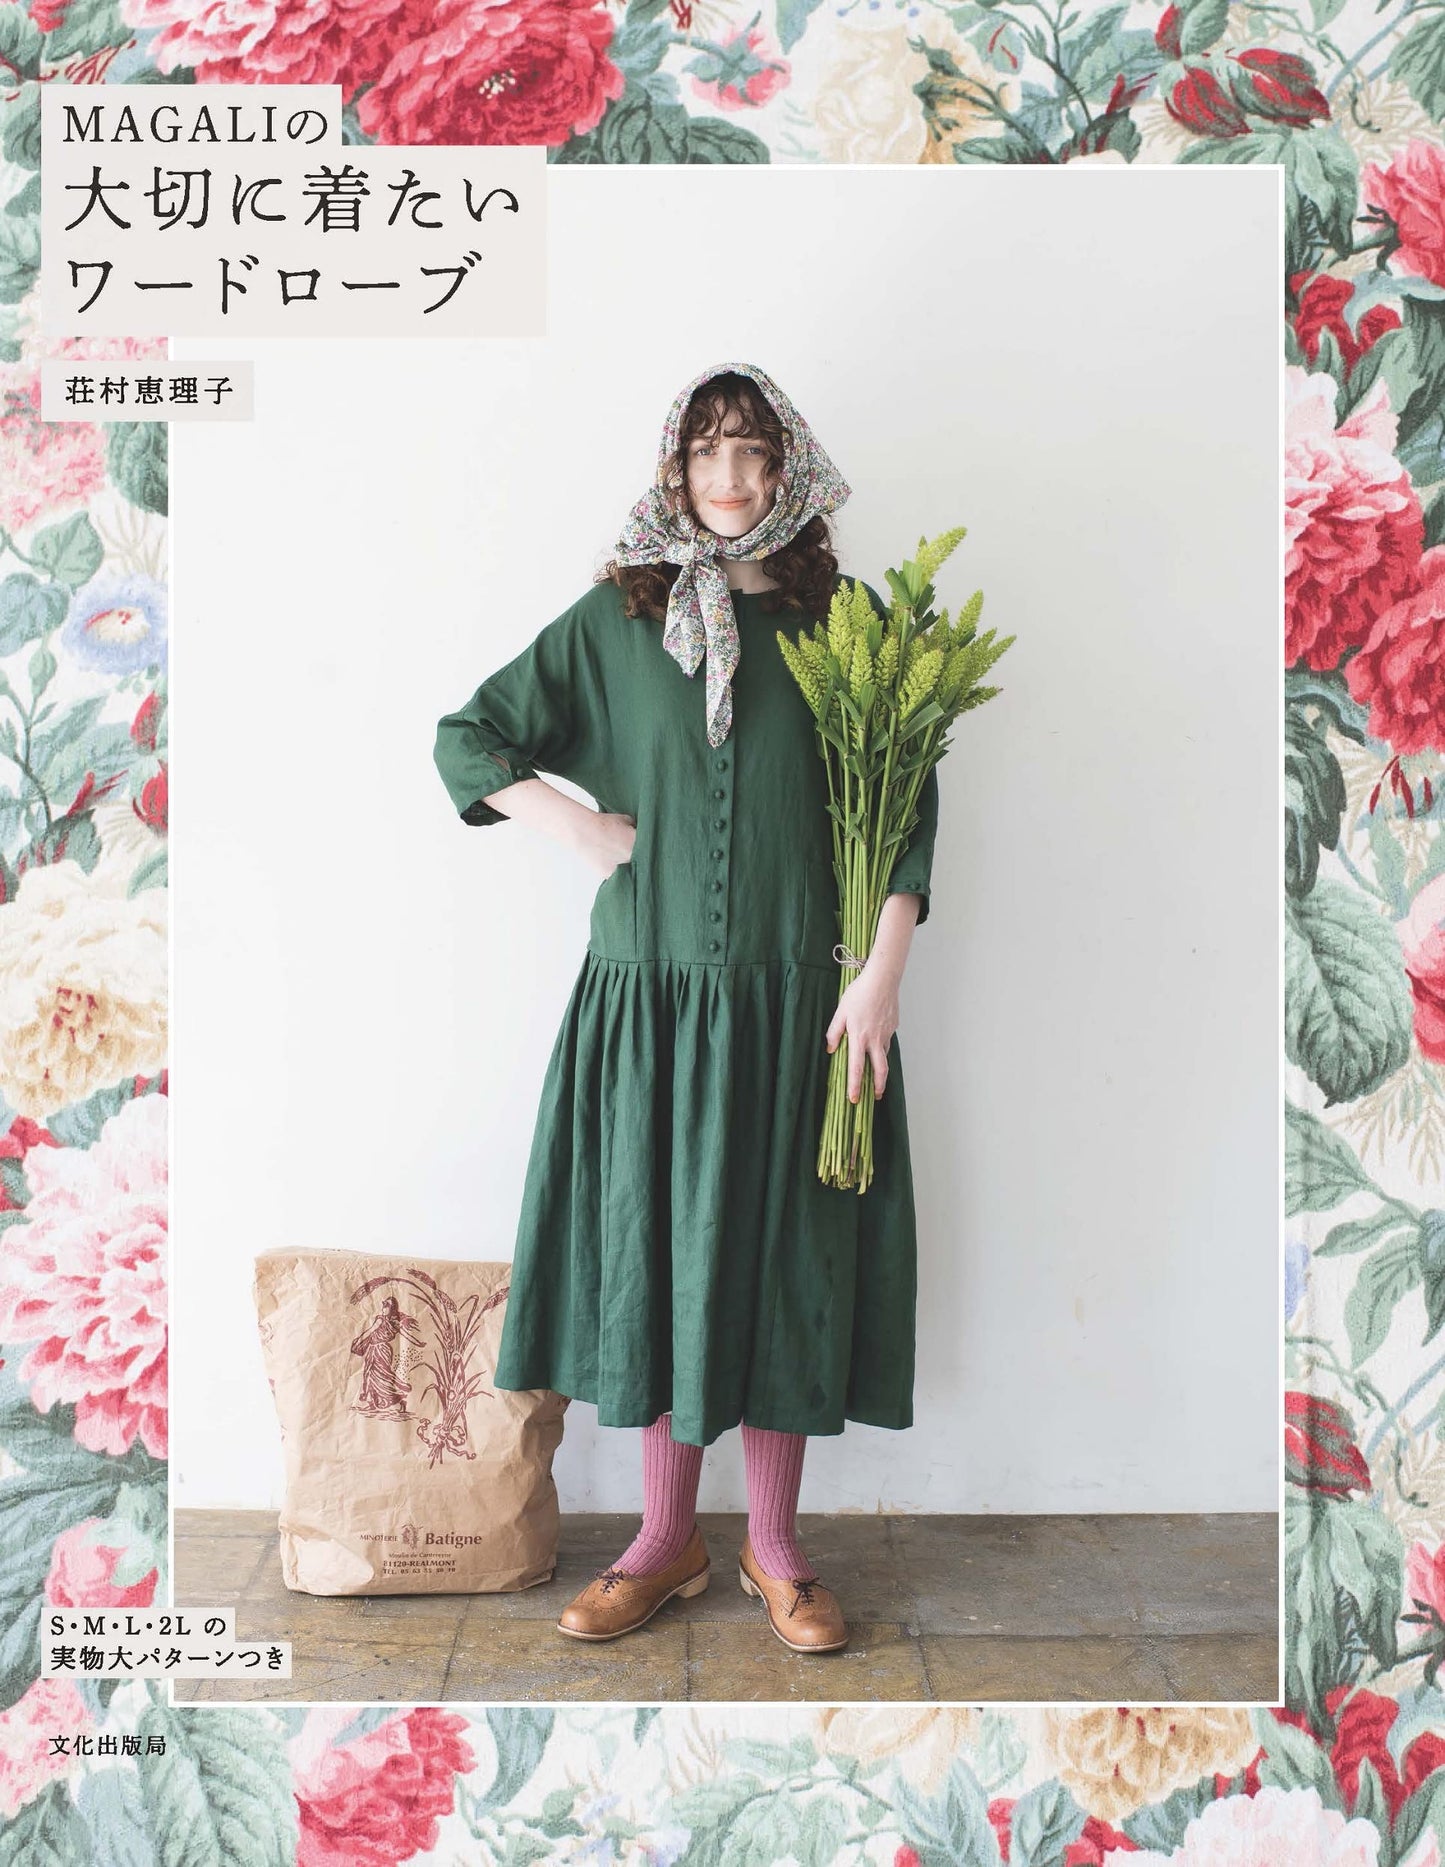 Japan | MAGALI's wardrobe that you want to wear MAGALI衣櫥 | books 書籍